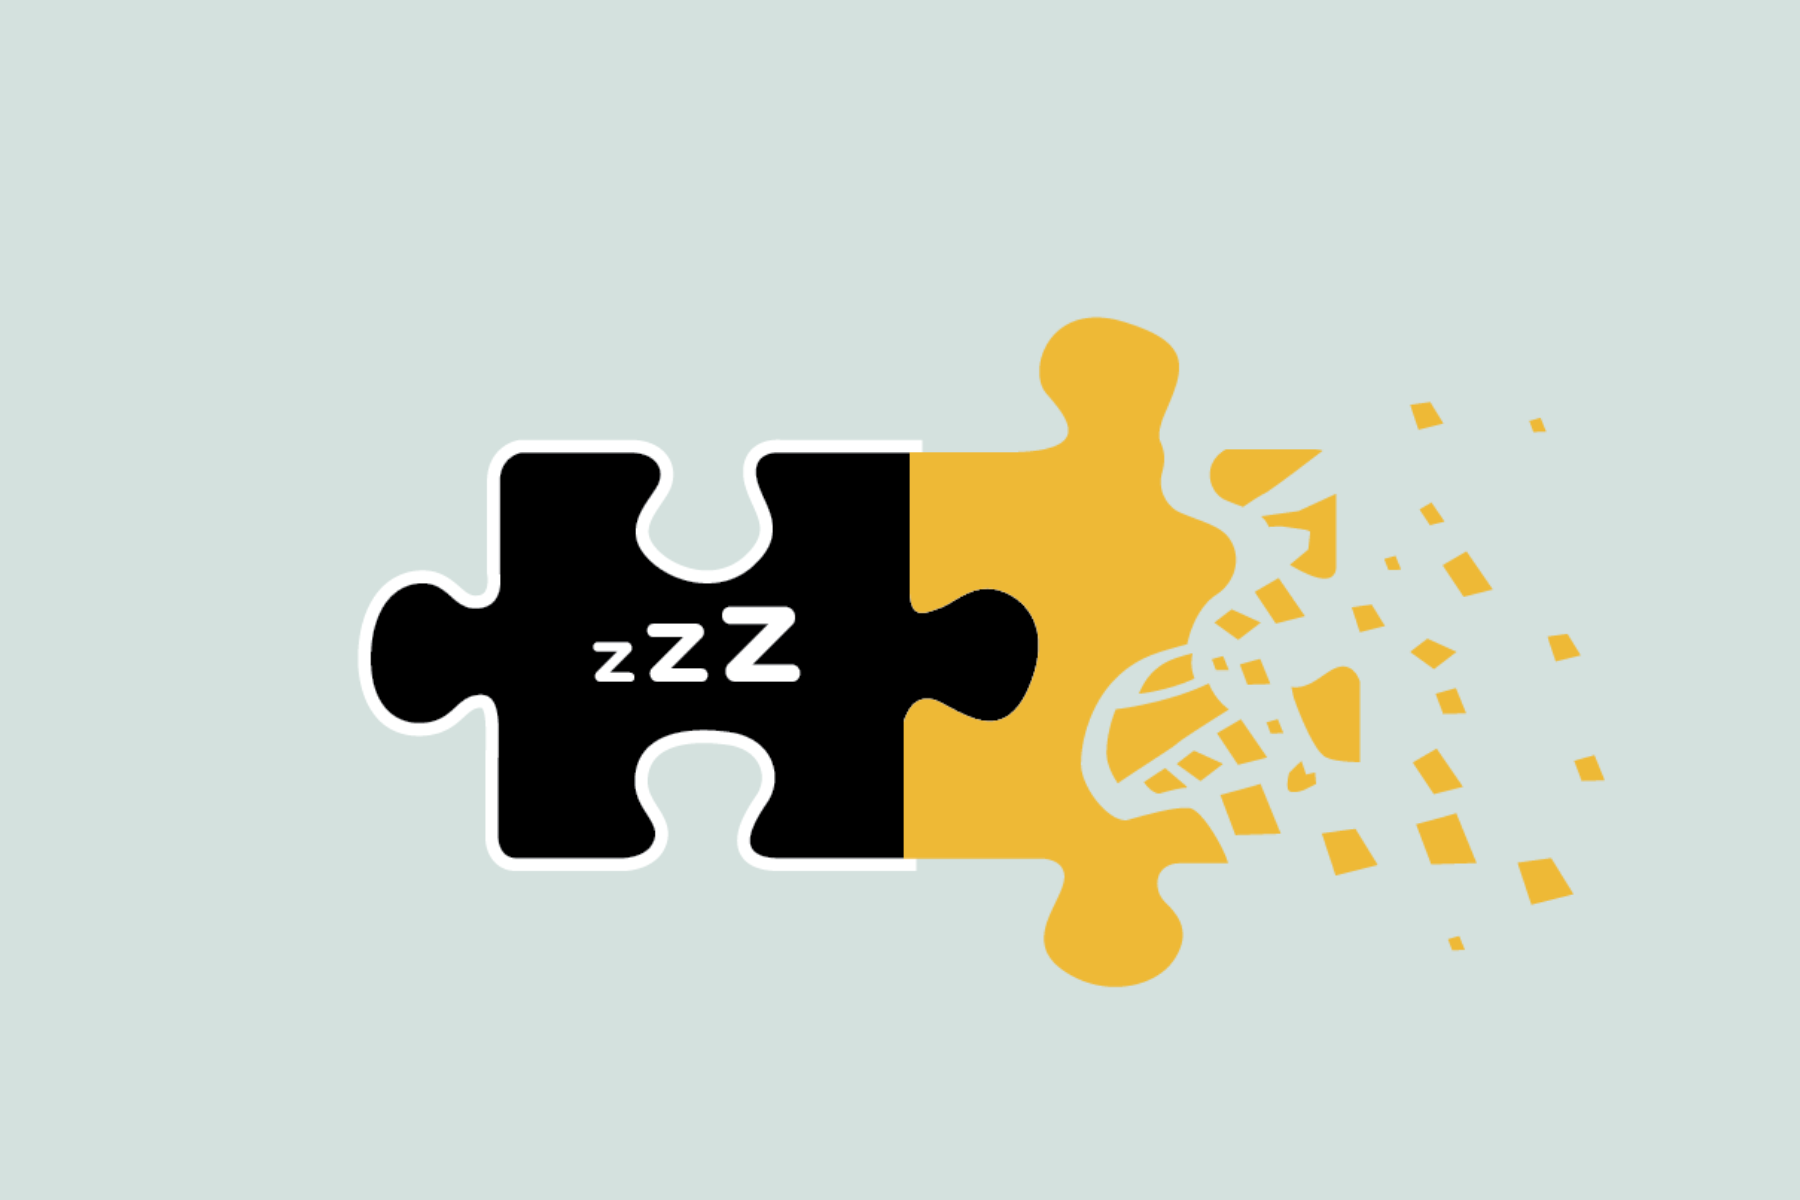 A clear connection between sleep and dementia